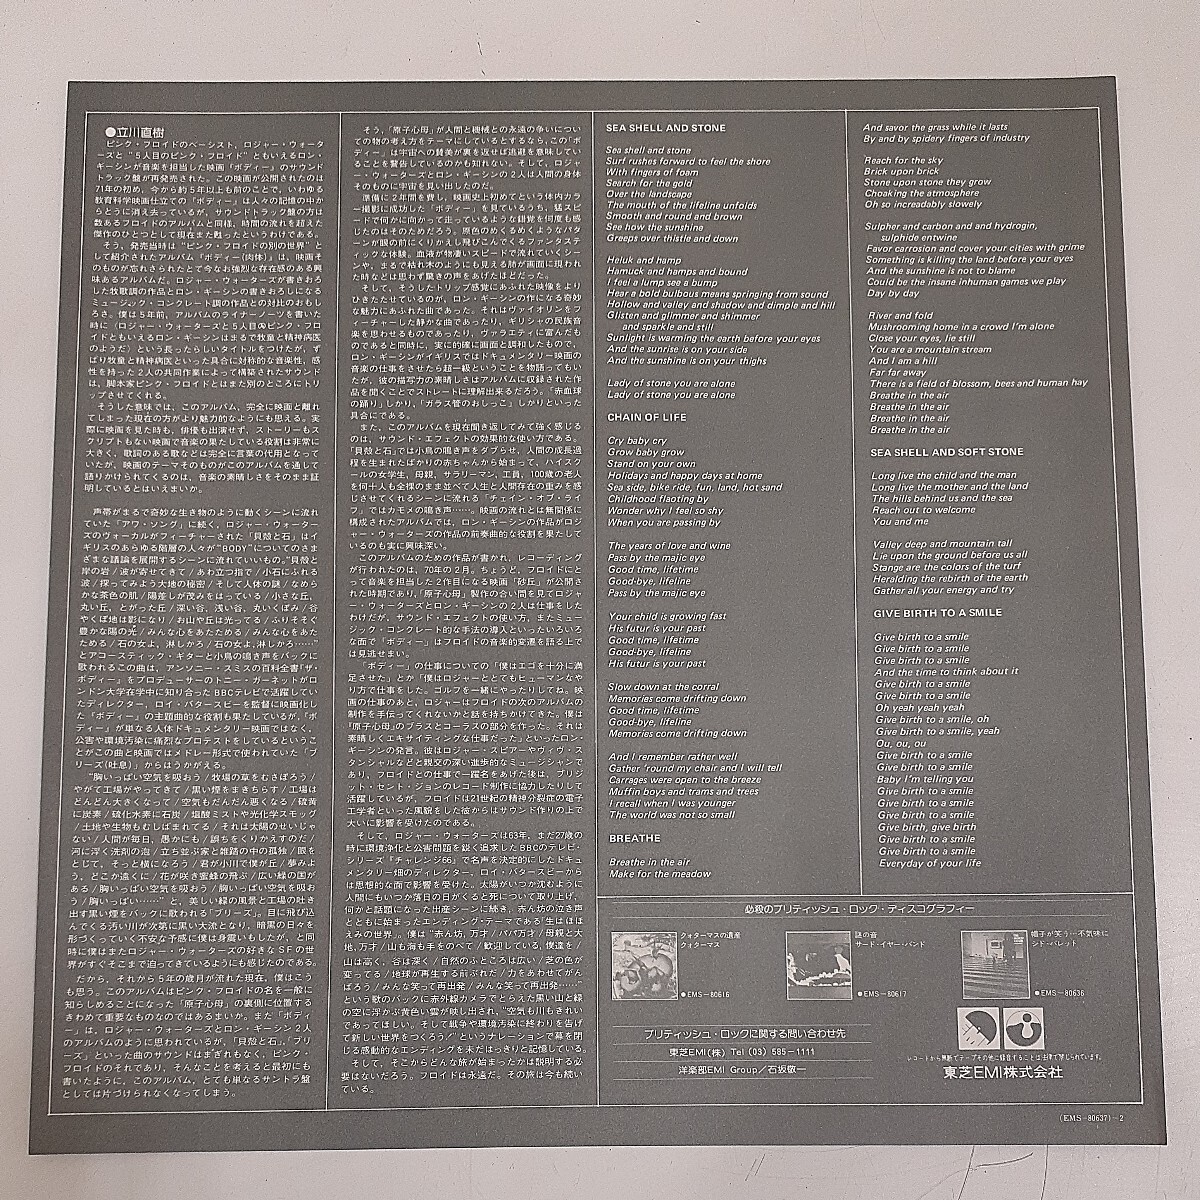 LP Ron Geesin & Roger Waters - music from THE BODY / ロン・ギーシン ロジャー・ウォーターズ - 肉体 / 国内盤 EMS-80637 レコード_画像4